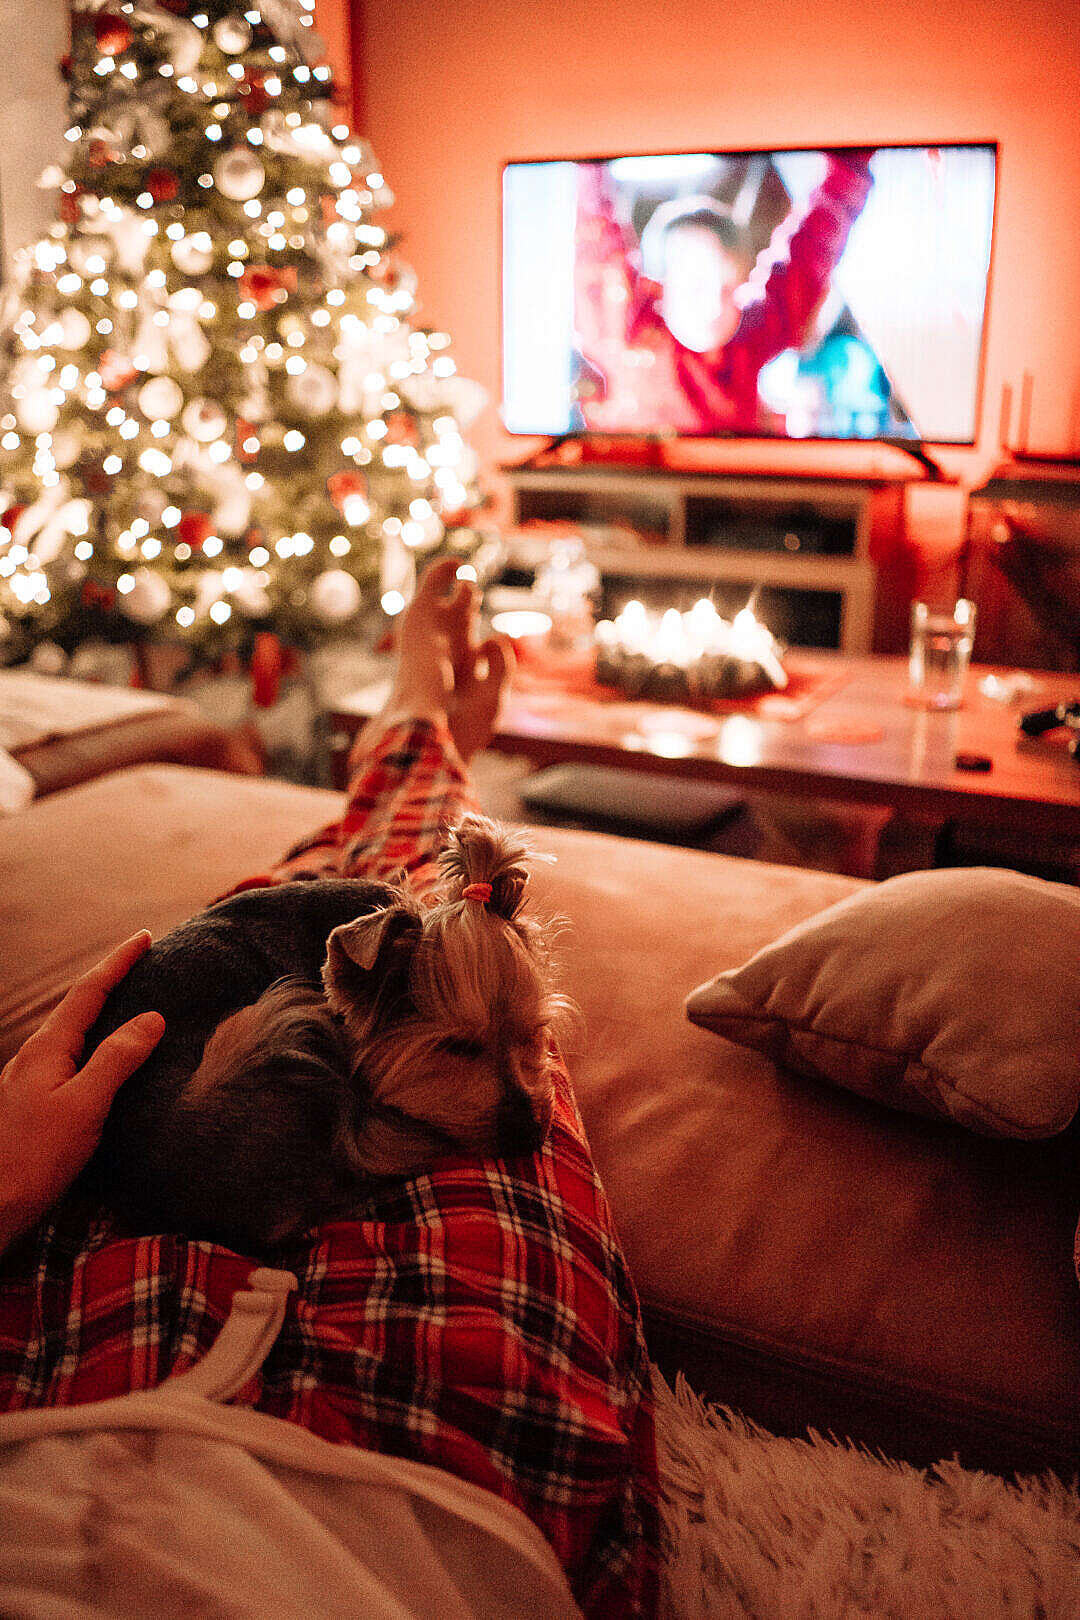 Download Man Relaxing on a Sofa with His Dog at Christmas FREE Stock Photo